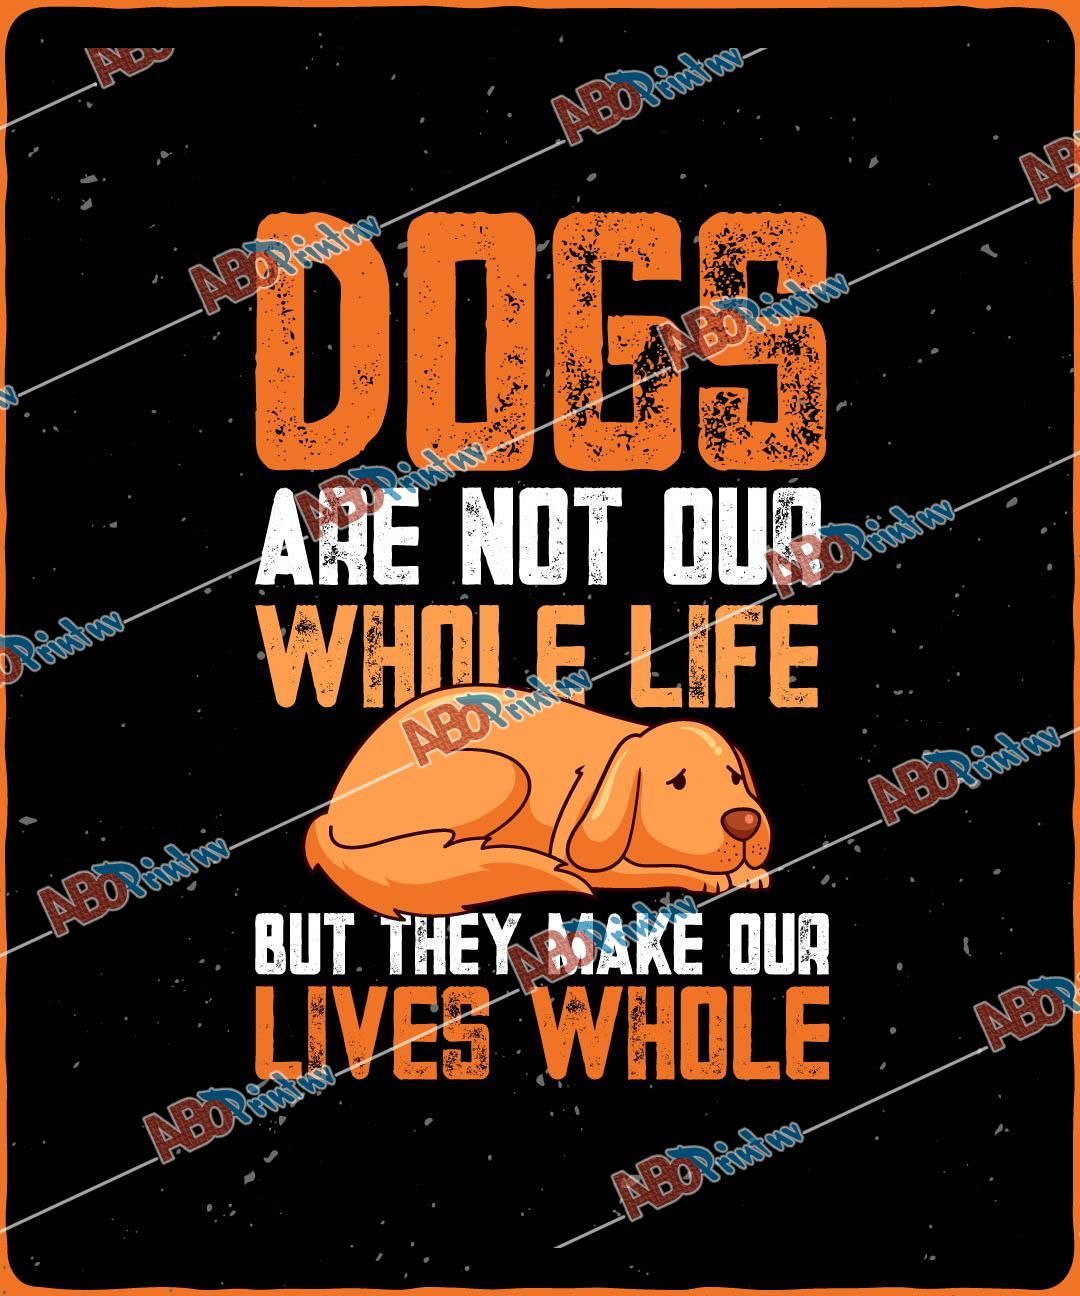 Dogs are not our whole life, but they make our lives wholeJPG (1).jpg